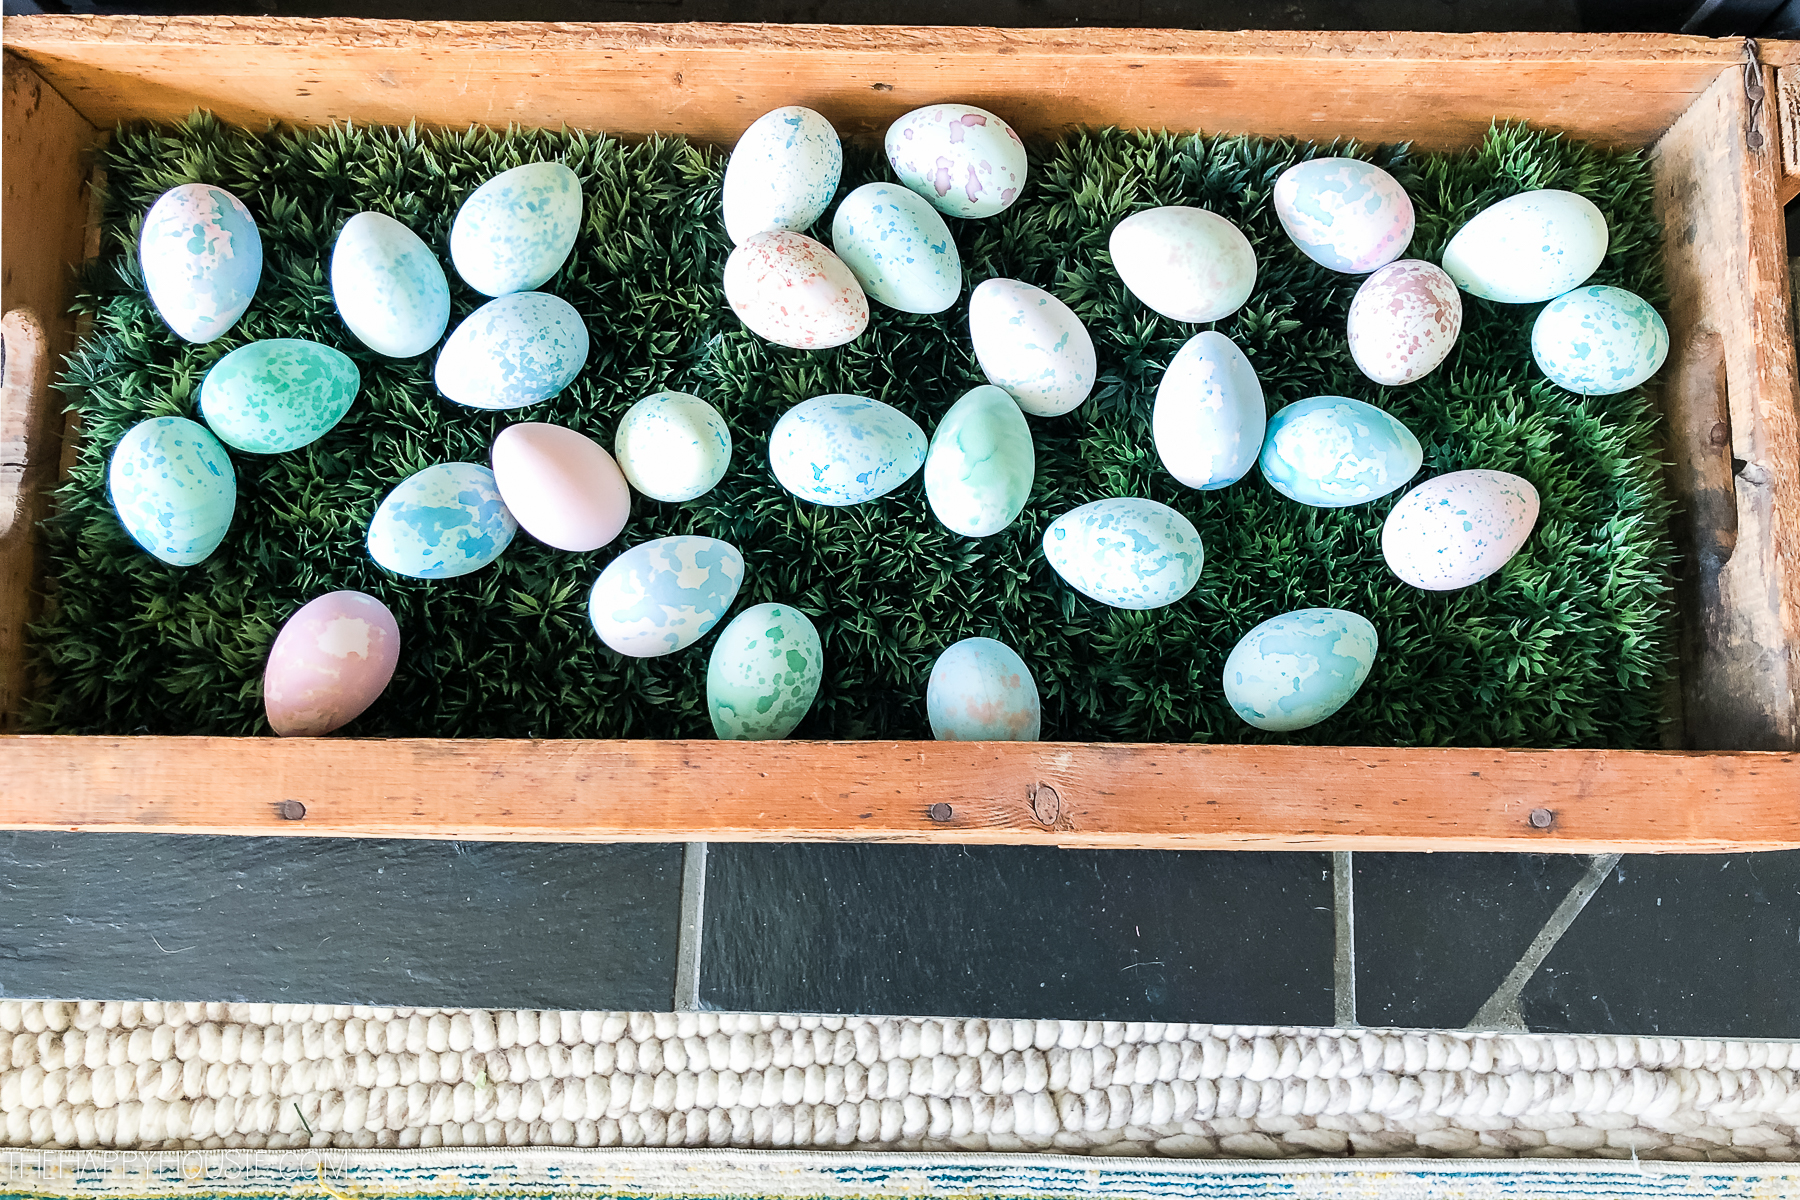 A wooden crate filled with coloured Easter eggs.